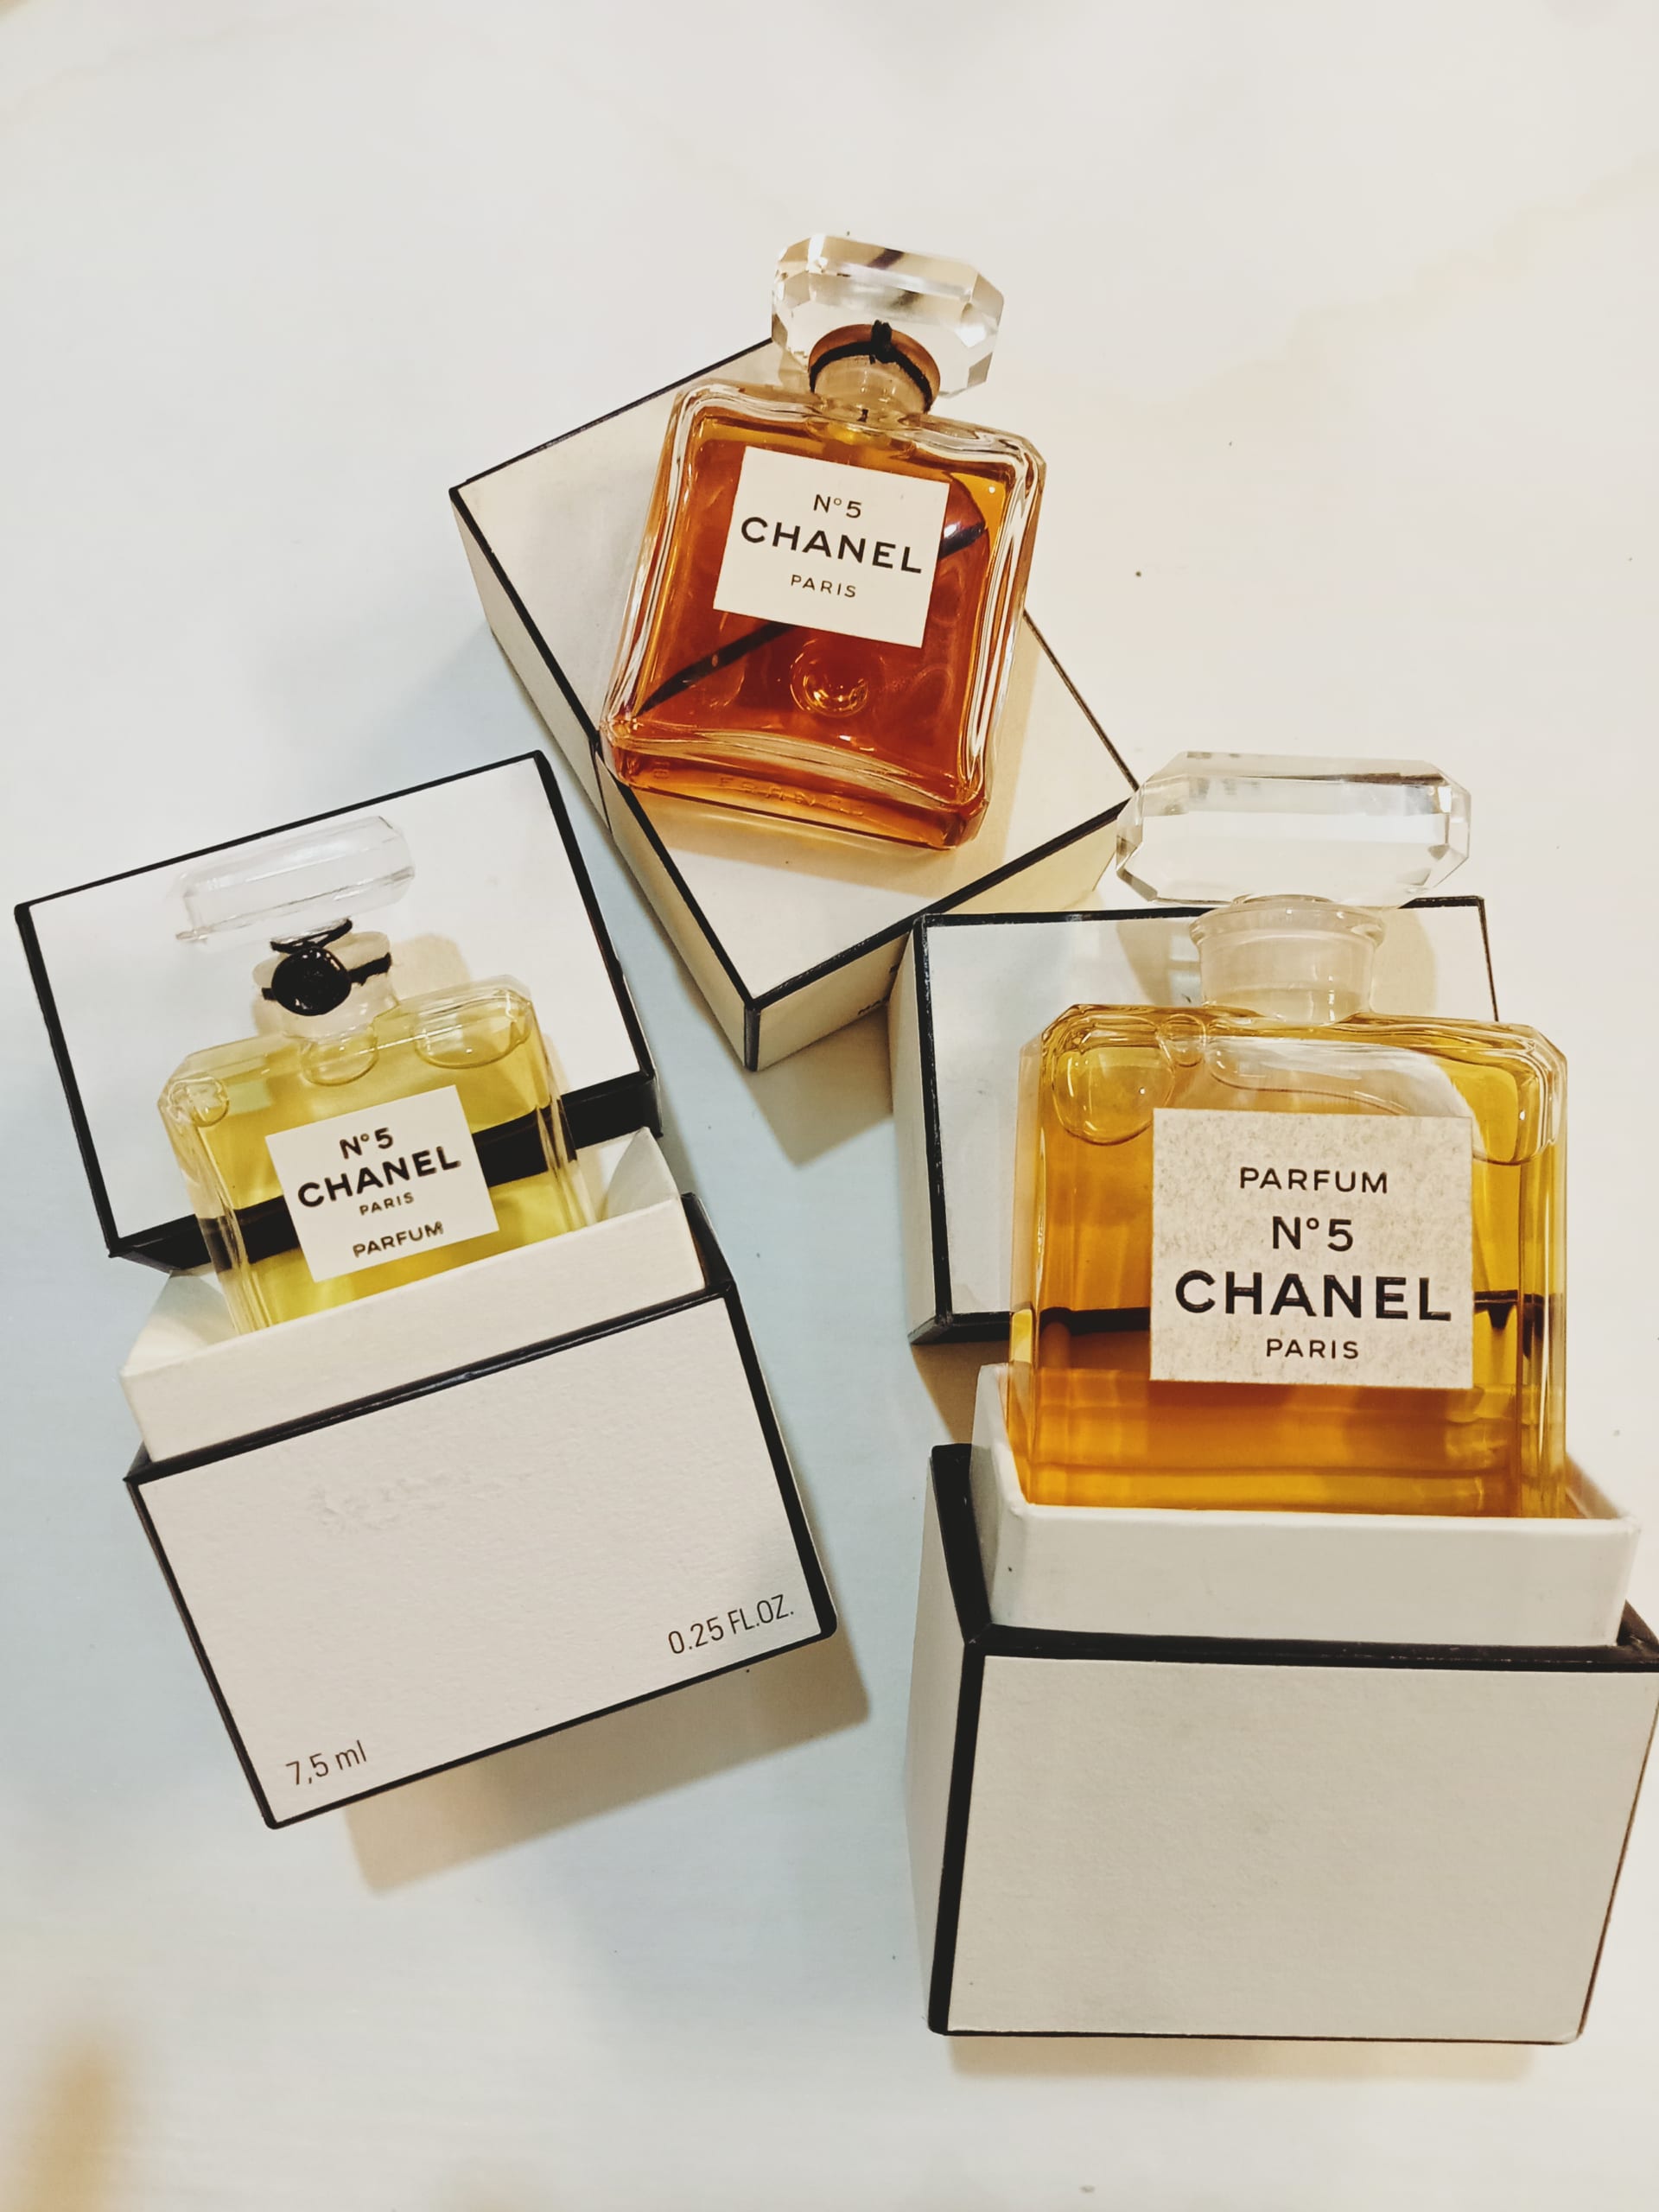 Vday Sales  Authentic Chanel Gift Box Set Hobbies  Toys Collectibles   Memorabilia Religious Items on Carousell